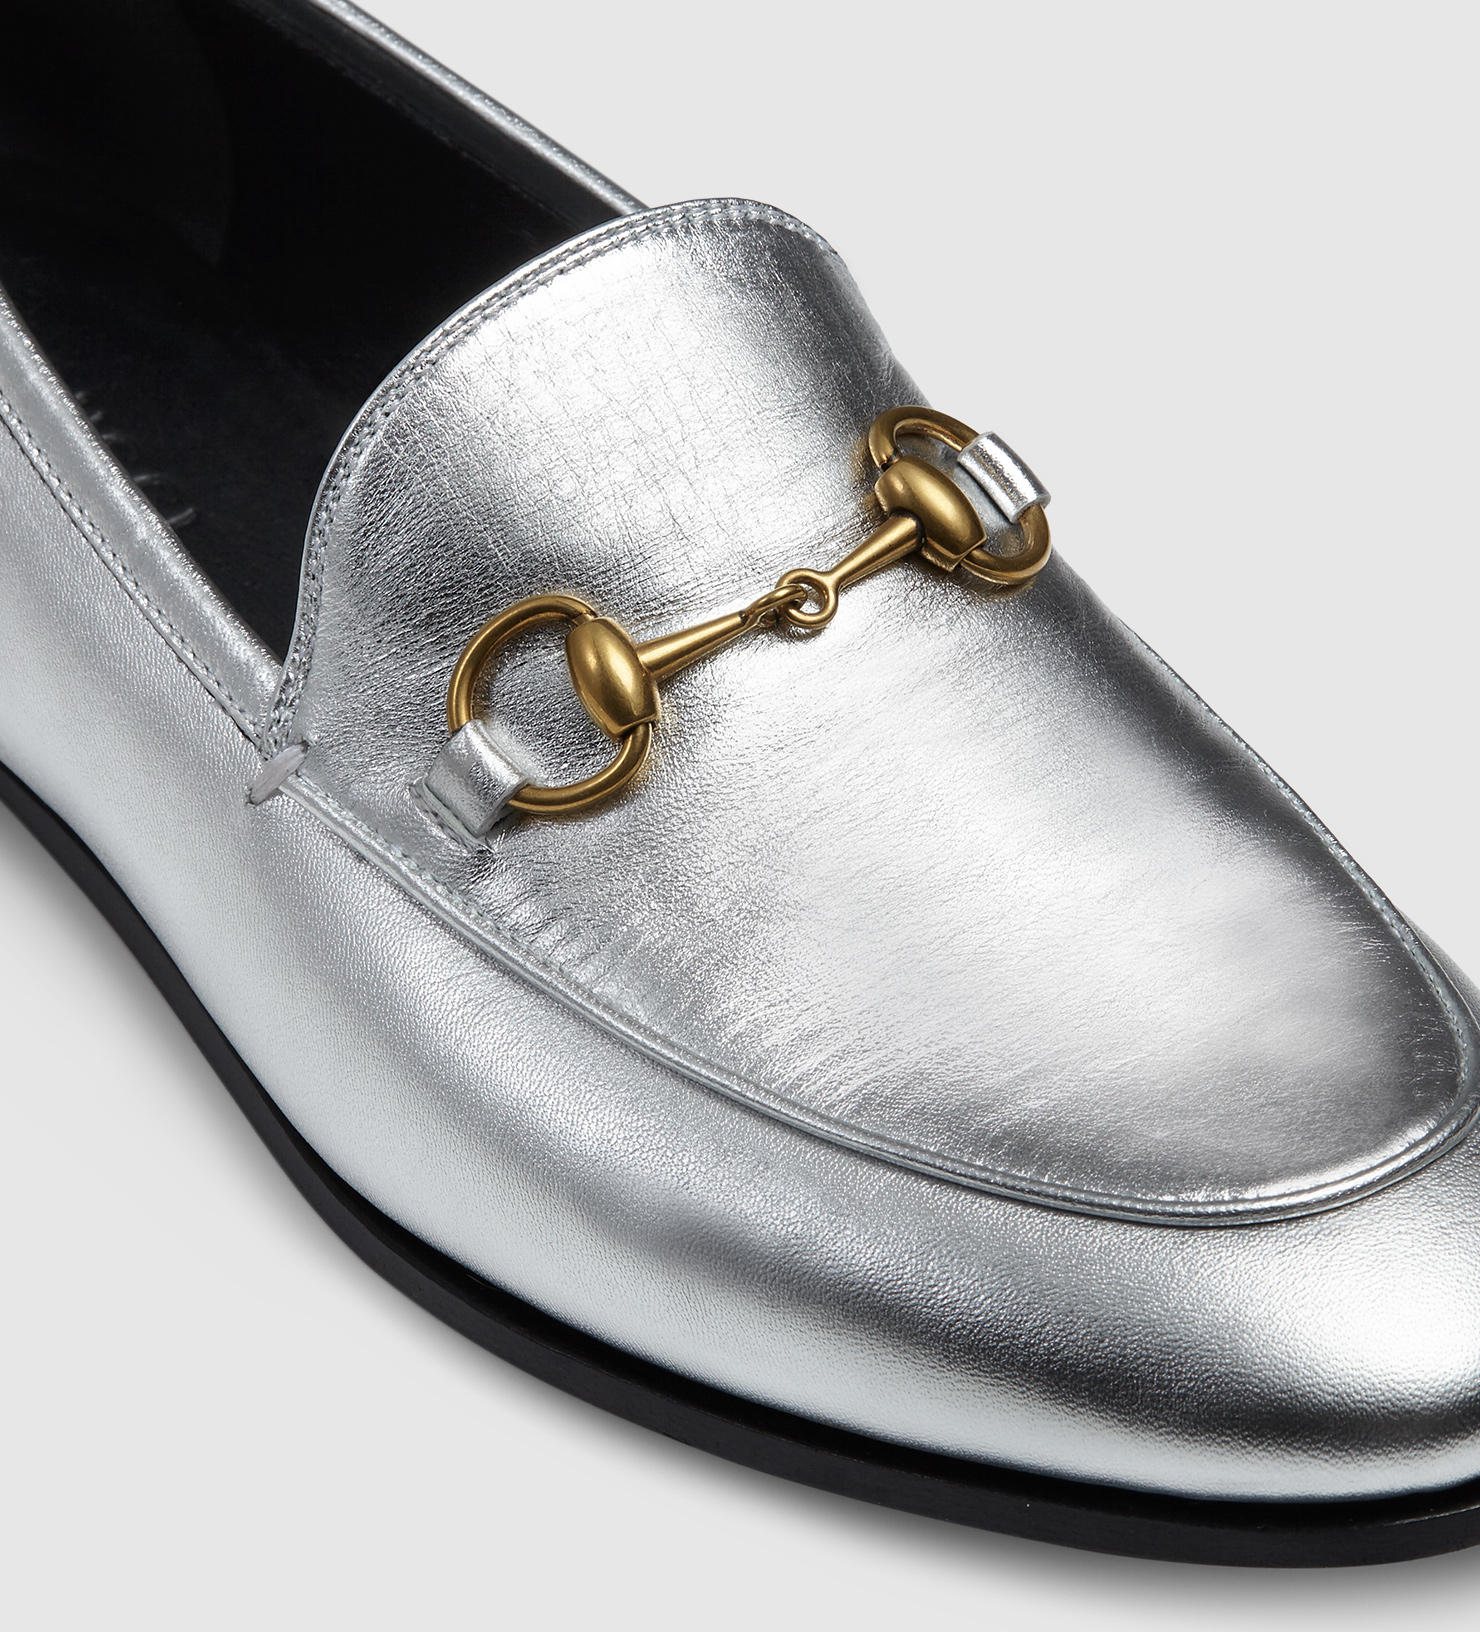 High street version of the Gucci Jordaan metallic loafer dupe (for as low  as £10) –